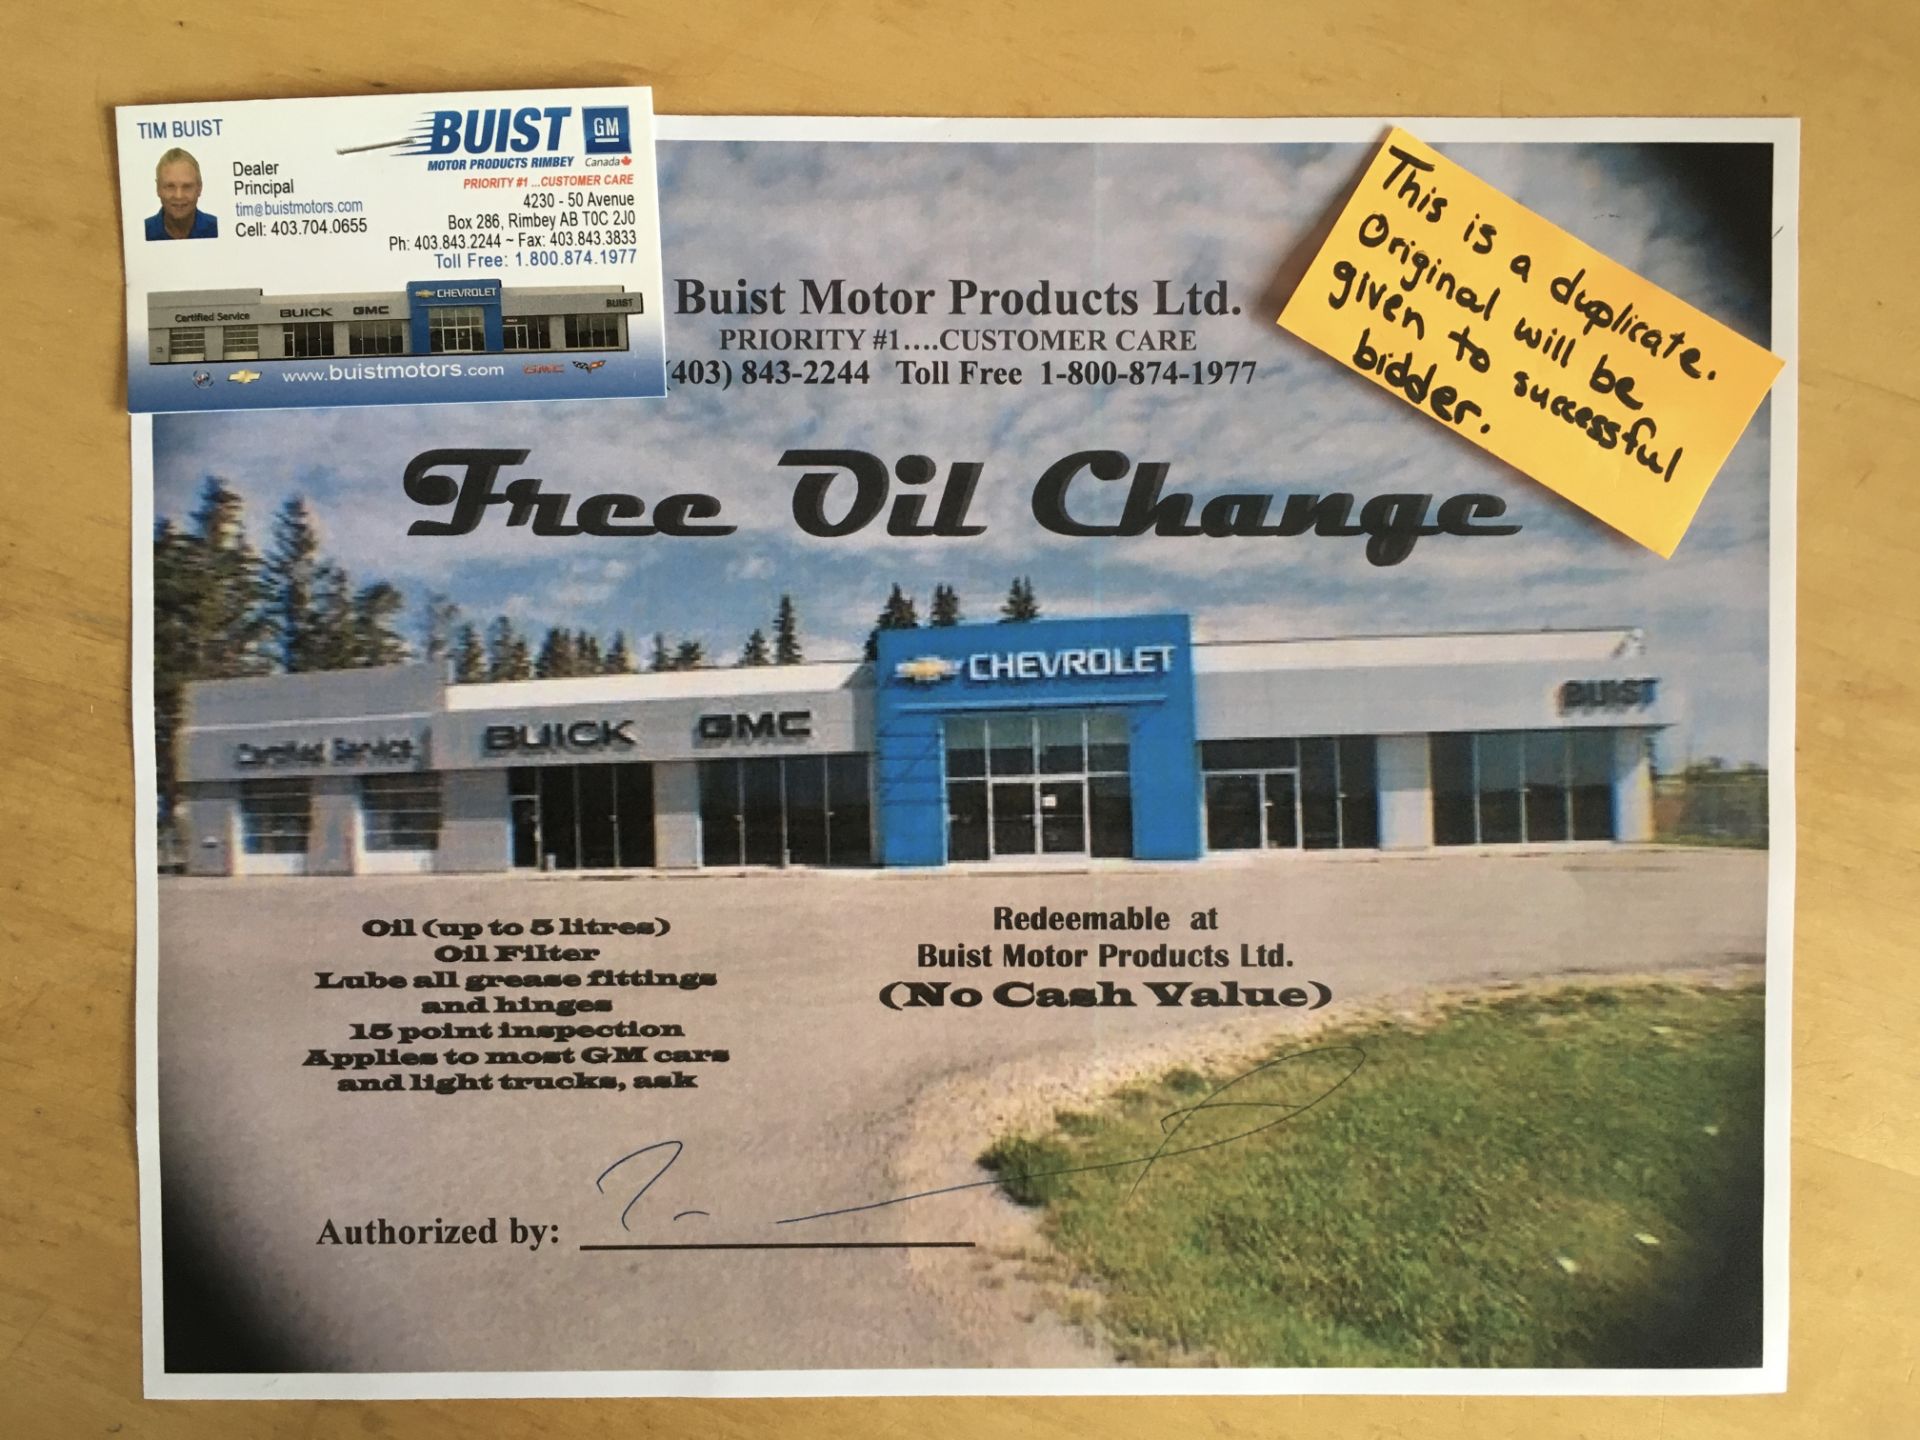 GIFT CERTIFICATE FOR A FREE OIL CHANGE Redeemable at Buist Motors Products Ltd. Oil change - Image 2 of 2